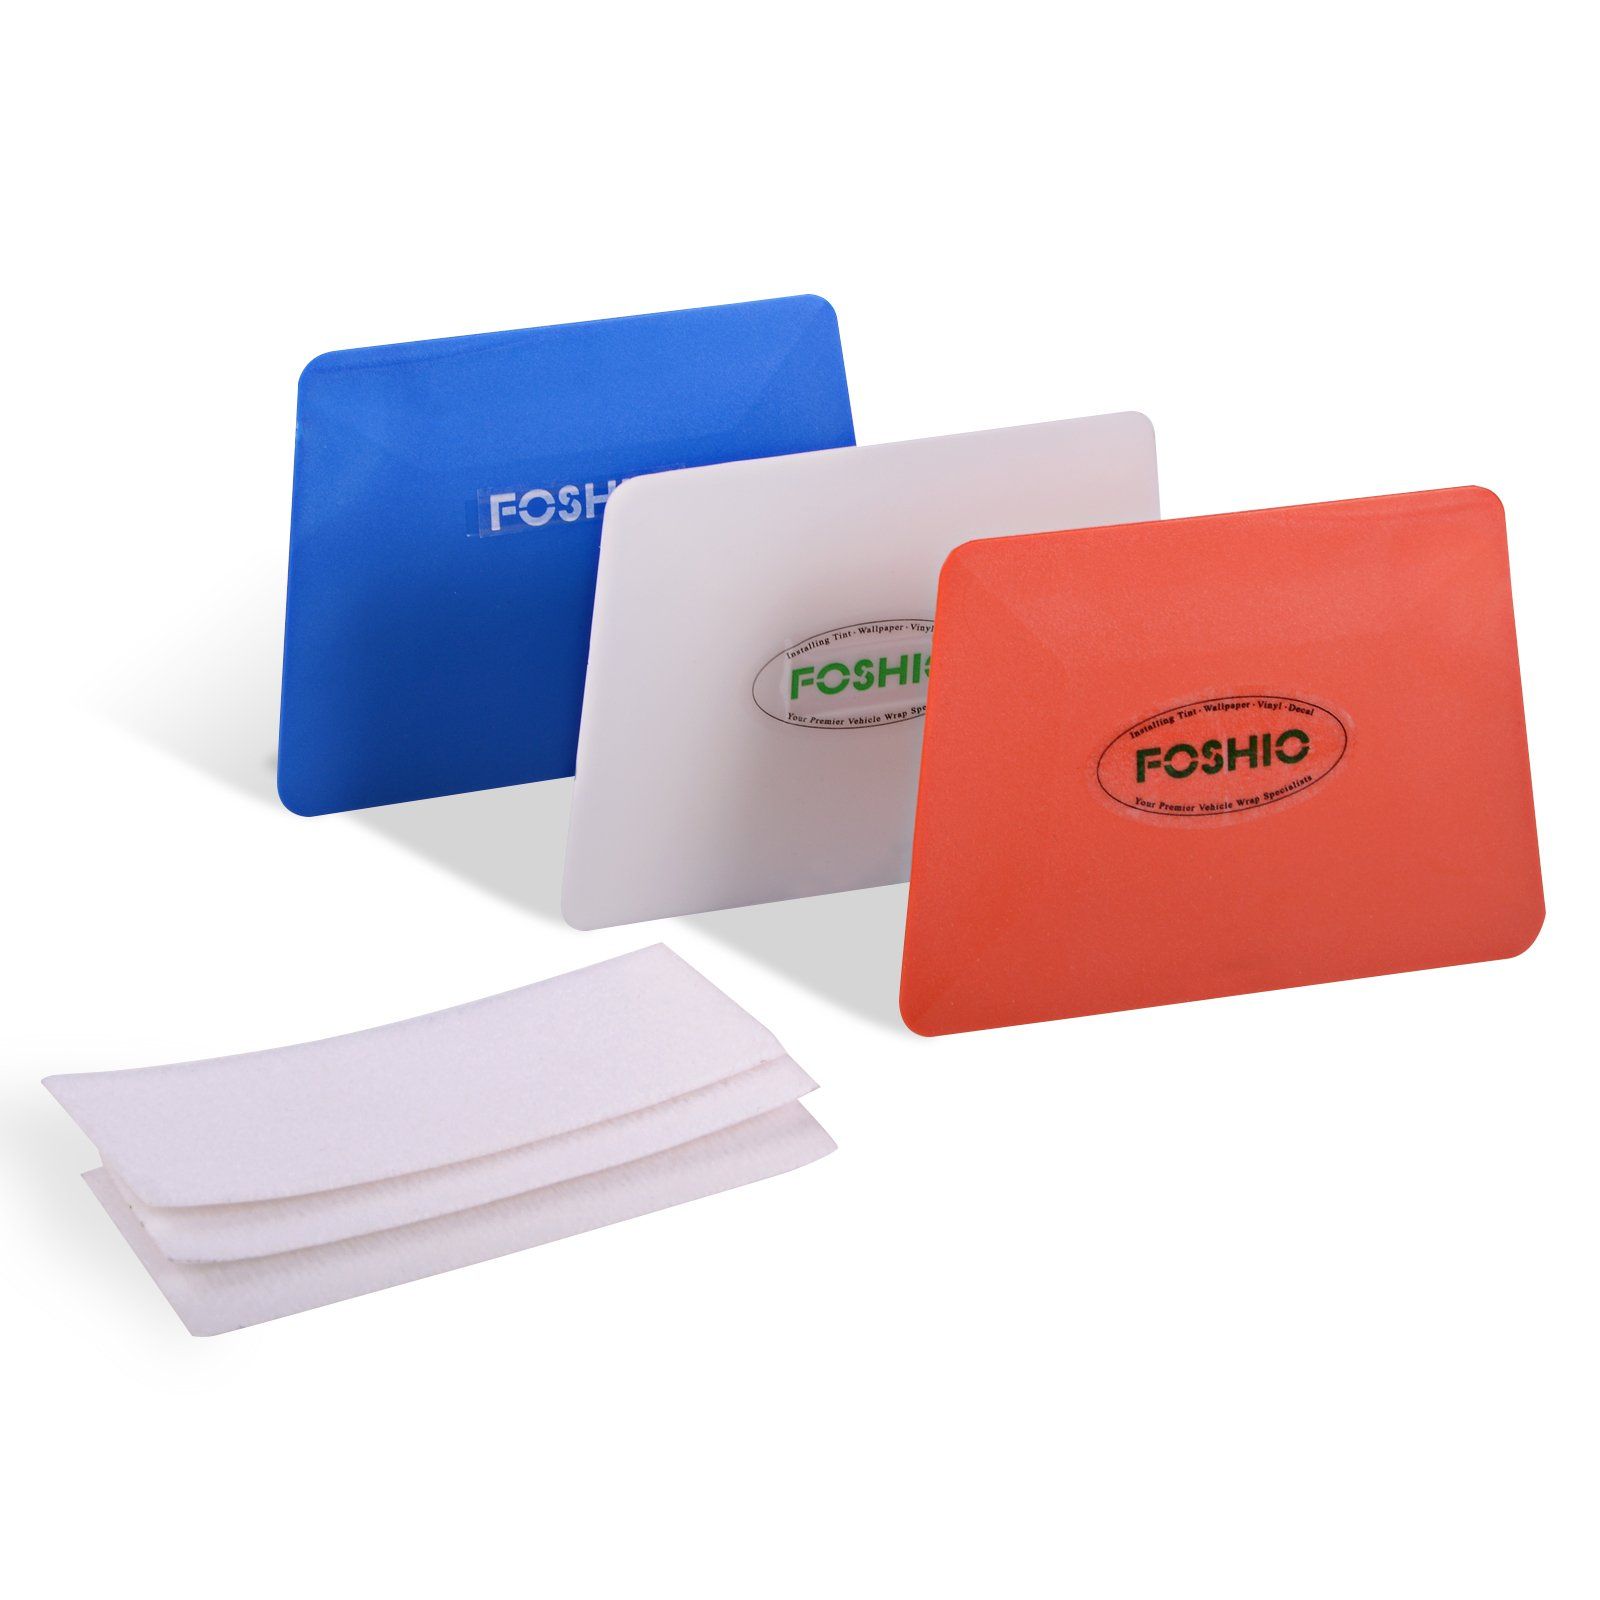 FOSHIO Vinyl Installing Tool Set Include White Hard Card, 4" Blue and Red Soft Card Style Edge Squee | Amazon (US)